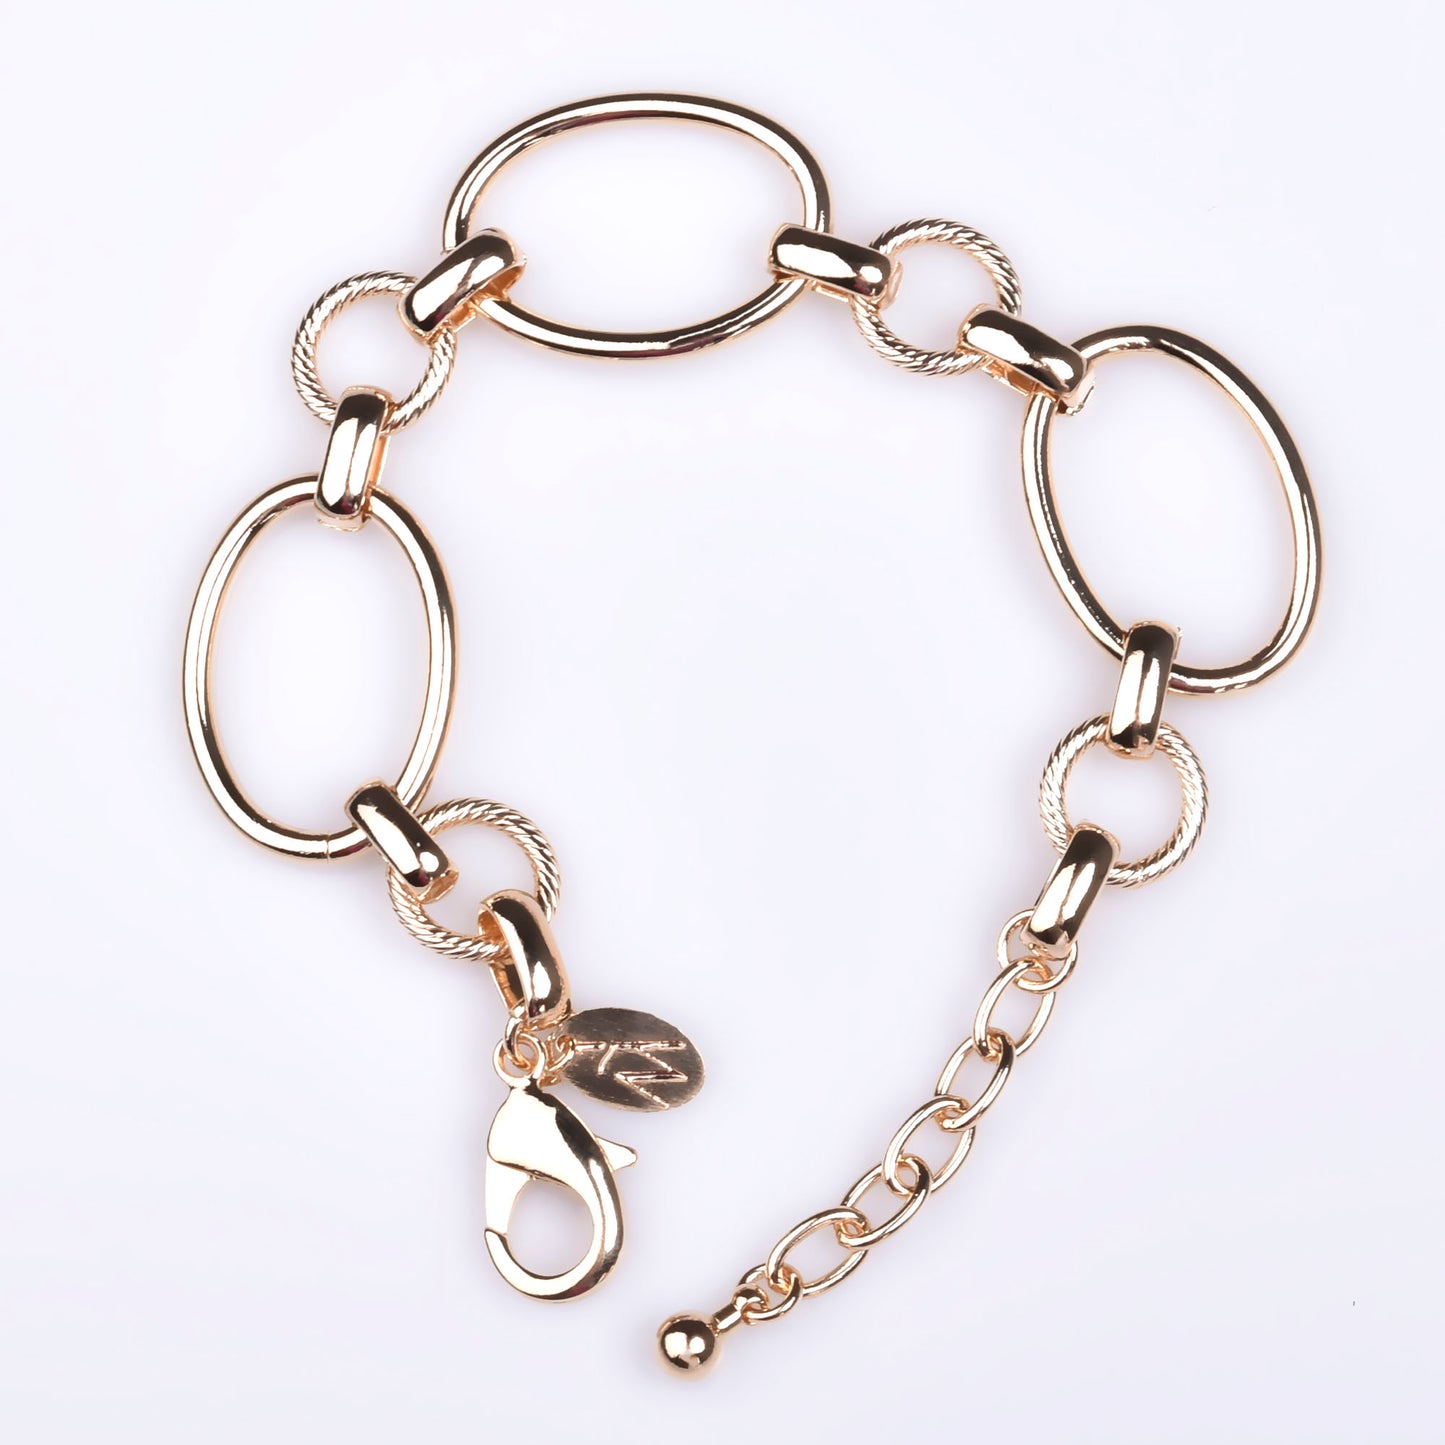 Women's Gold Plated Bracelet with Oval Rings